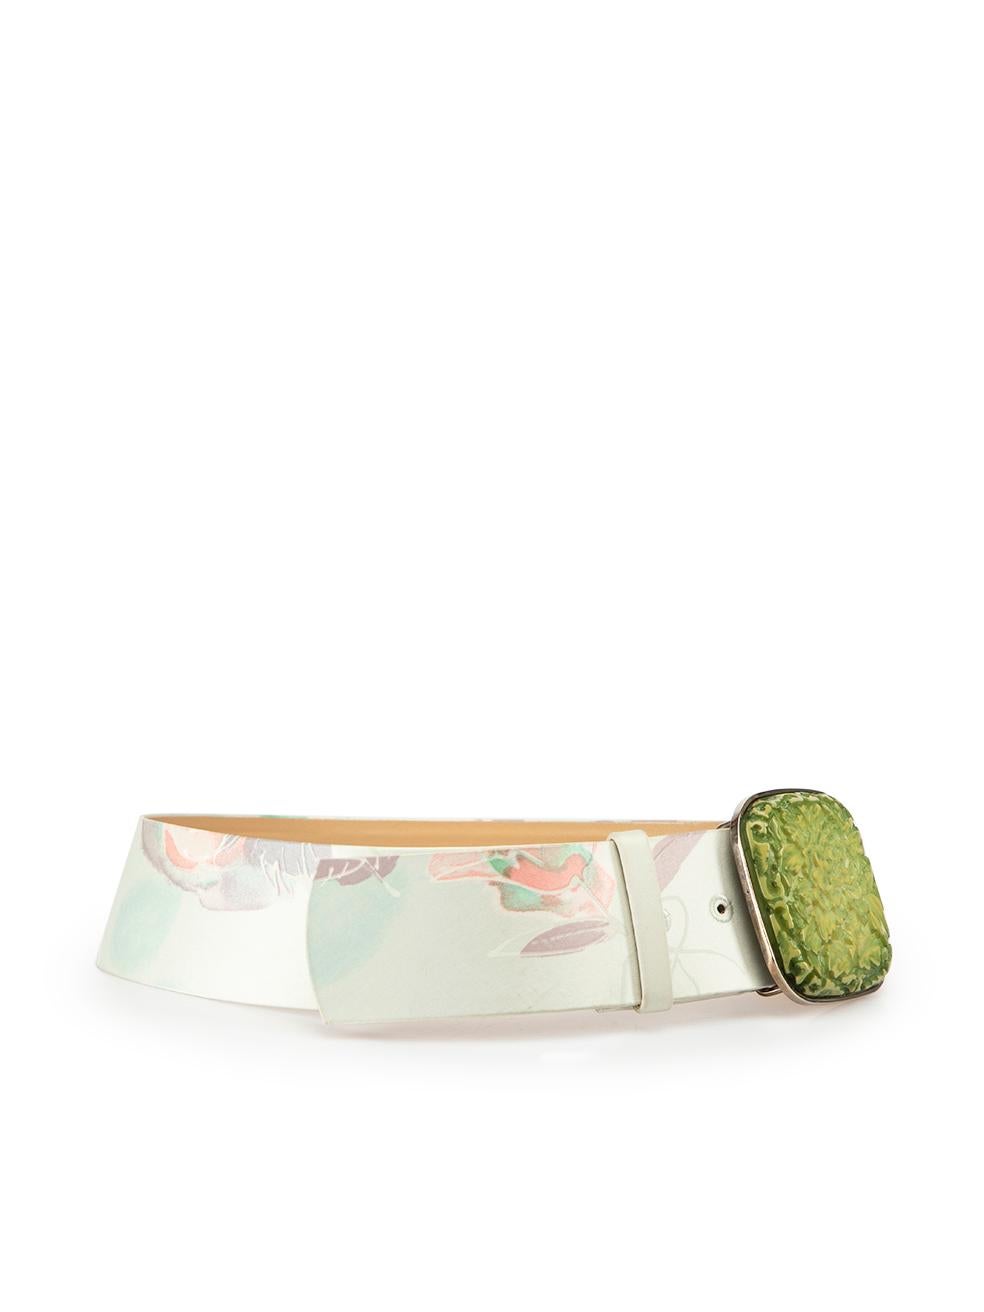 CONDITION is Very good. Minimal wear to belt is evident. Minimal wear to interior and exterior with visible scuff marks on this used Giorgio Armani designer resale item.



Details


Multicolour

Silk

Wide belt

Floral print

Green floral